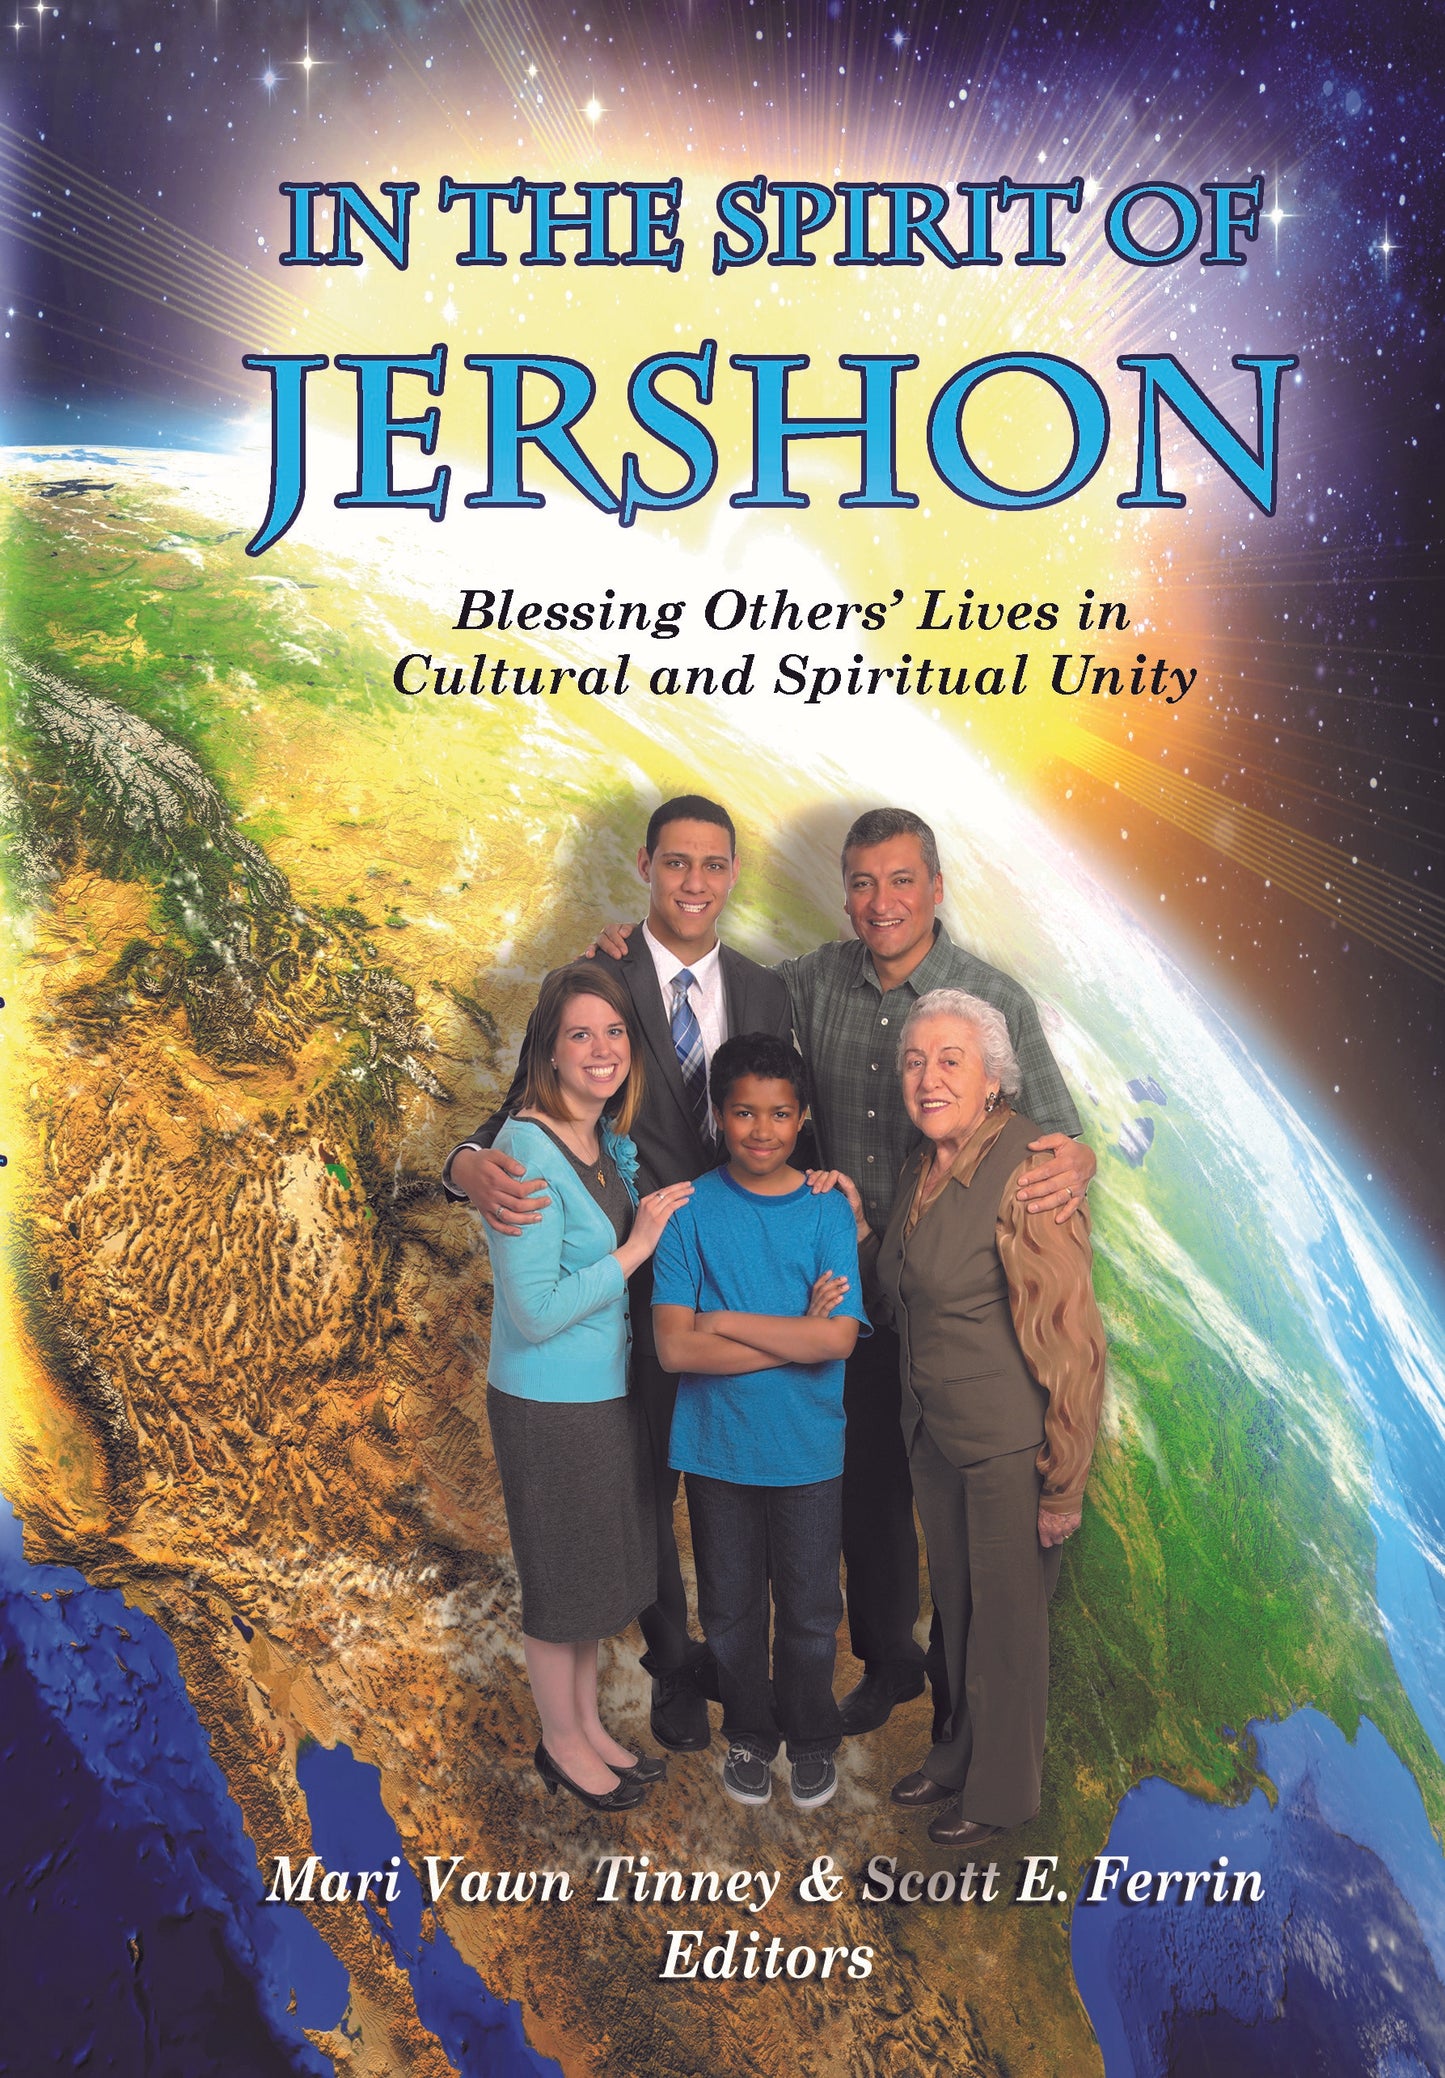 In The Spirit of Jershon: Blessing Others' Lives in Cultural and Spiritual Unity